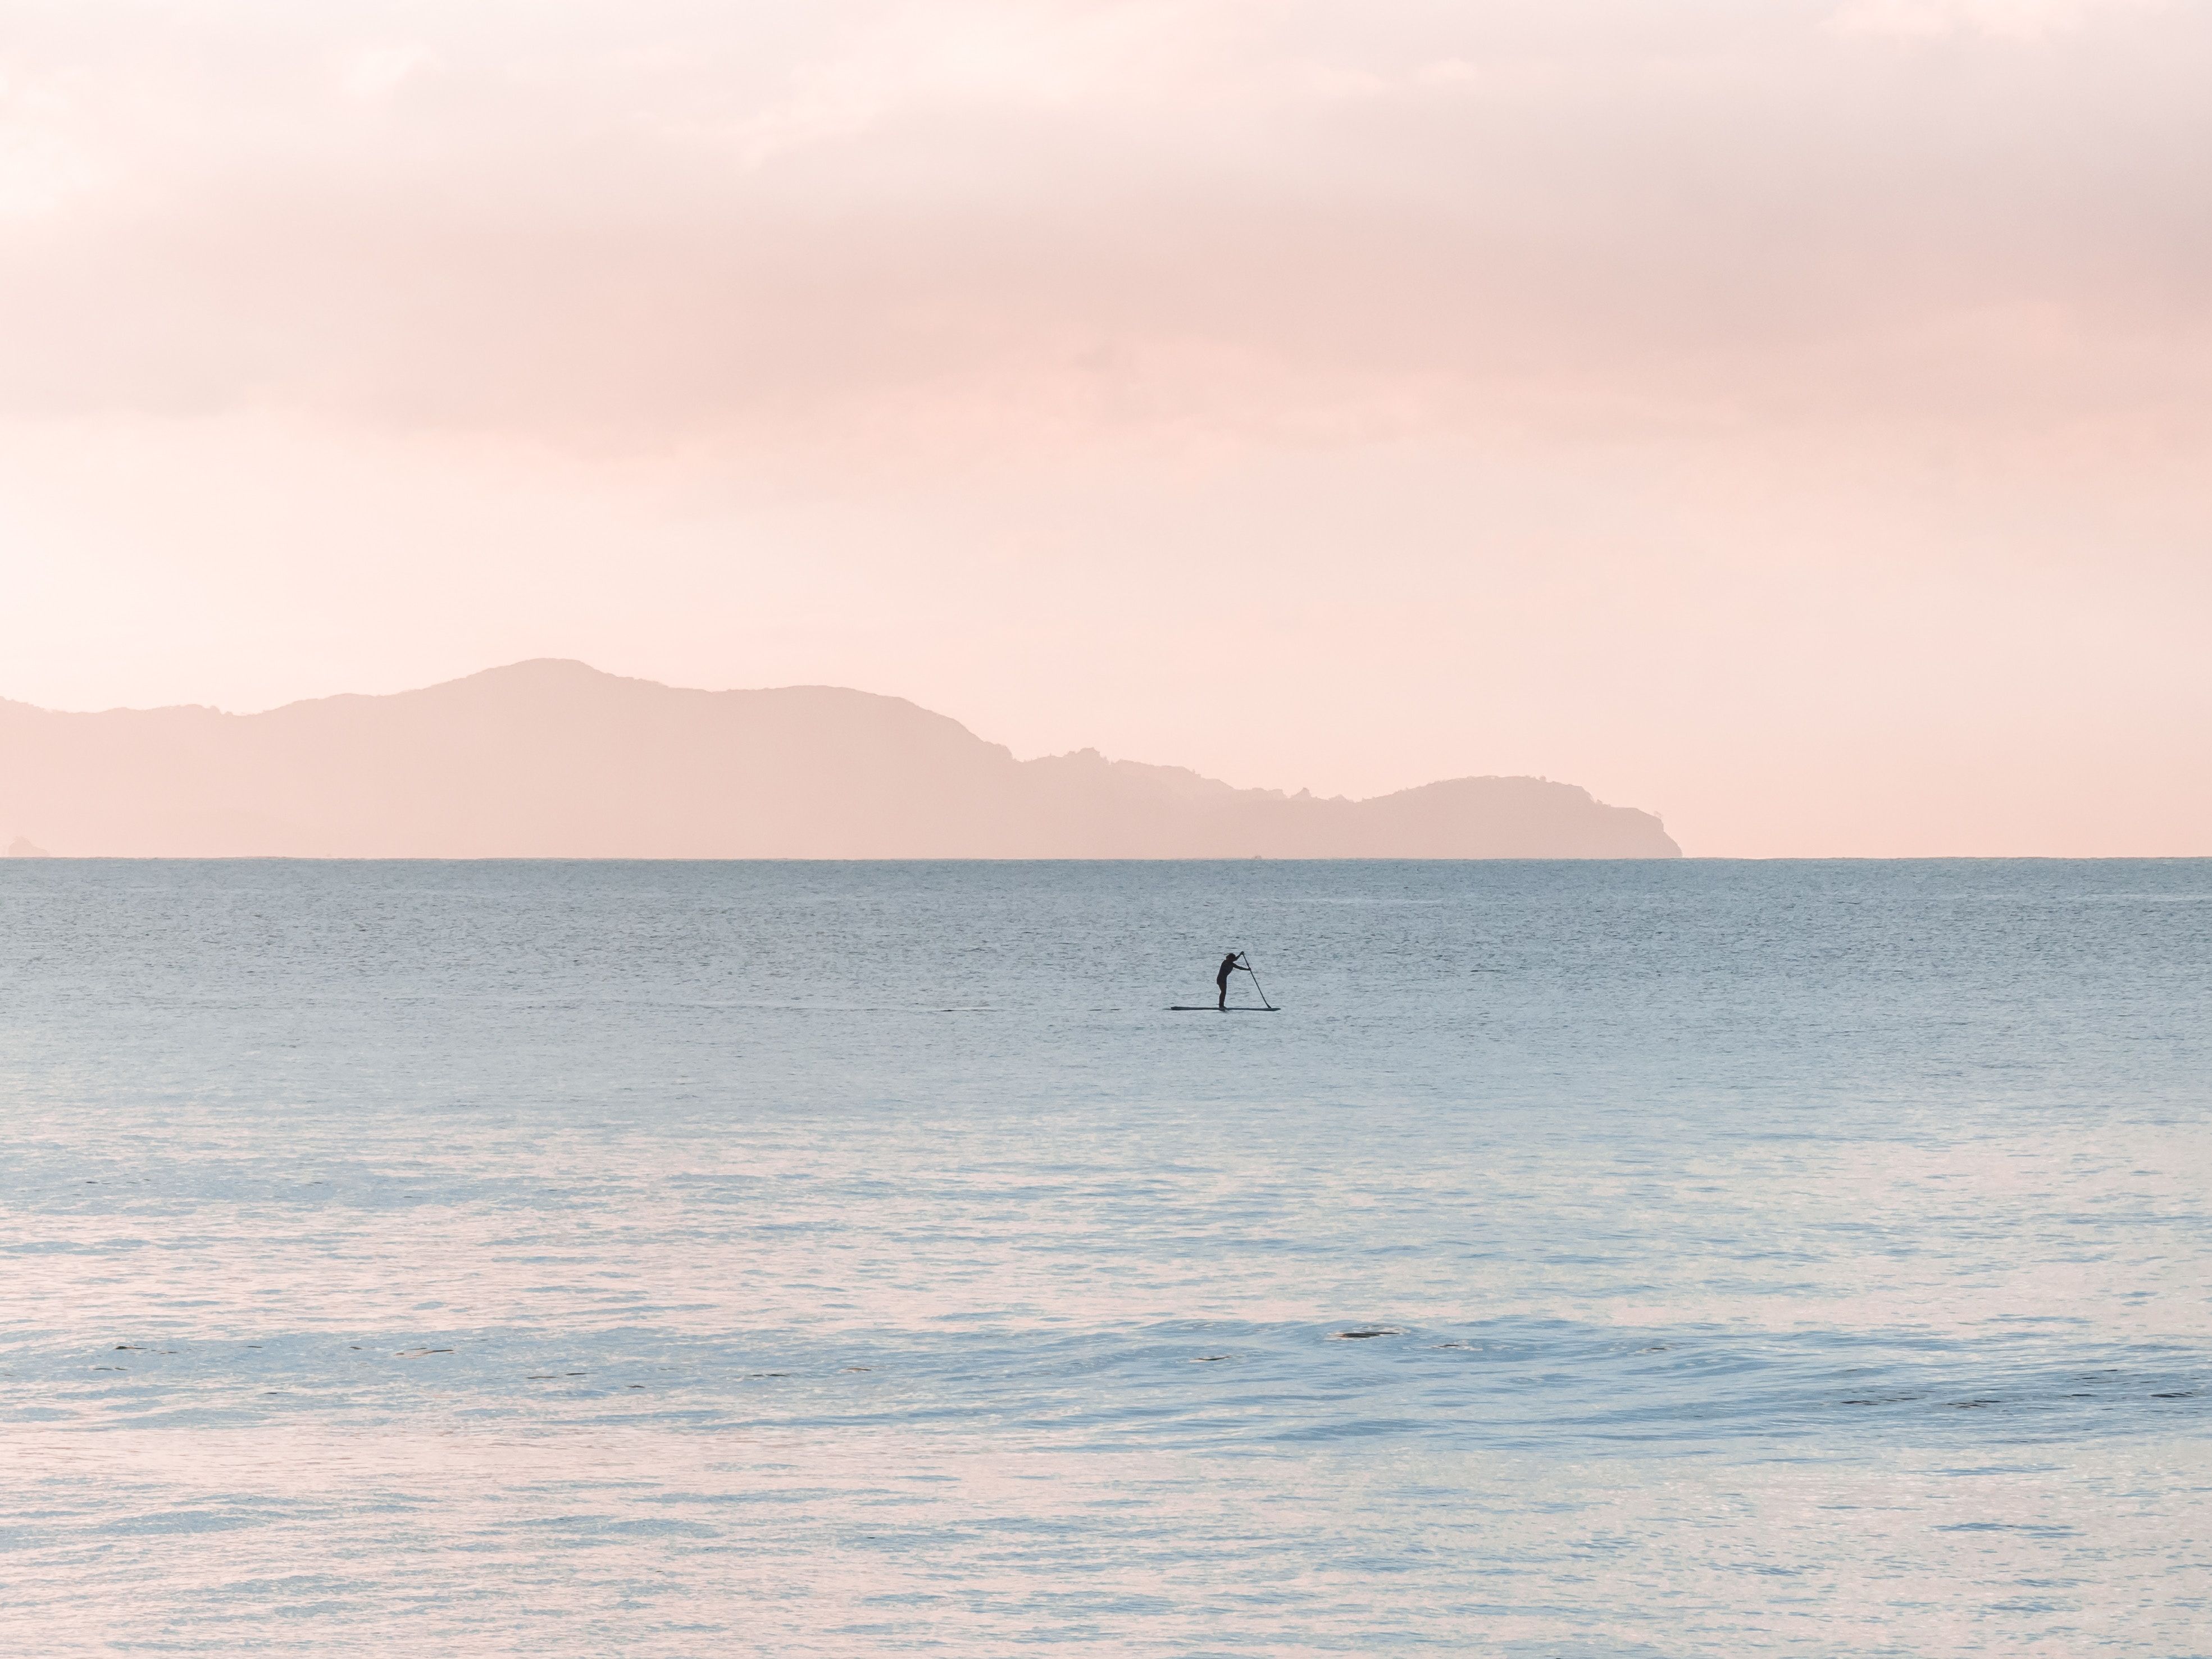 3938x2954 #far, #blue, #pastel, #silhouette, #ocean, #coast, #simple, #small, #person, #horizon, #minimal, #background, #sea, #recreation, #paddleboard, #pink, #PNG image, #rowing, #clean, #wallpaper, #alone